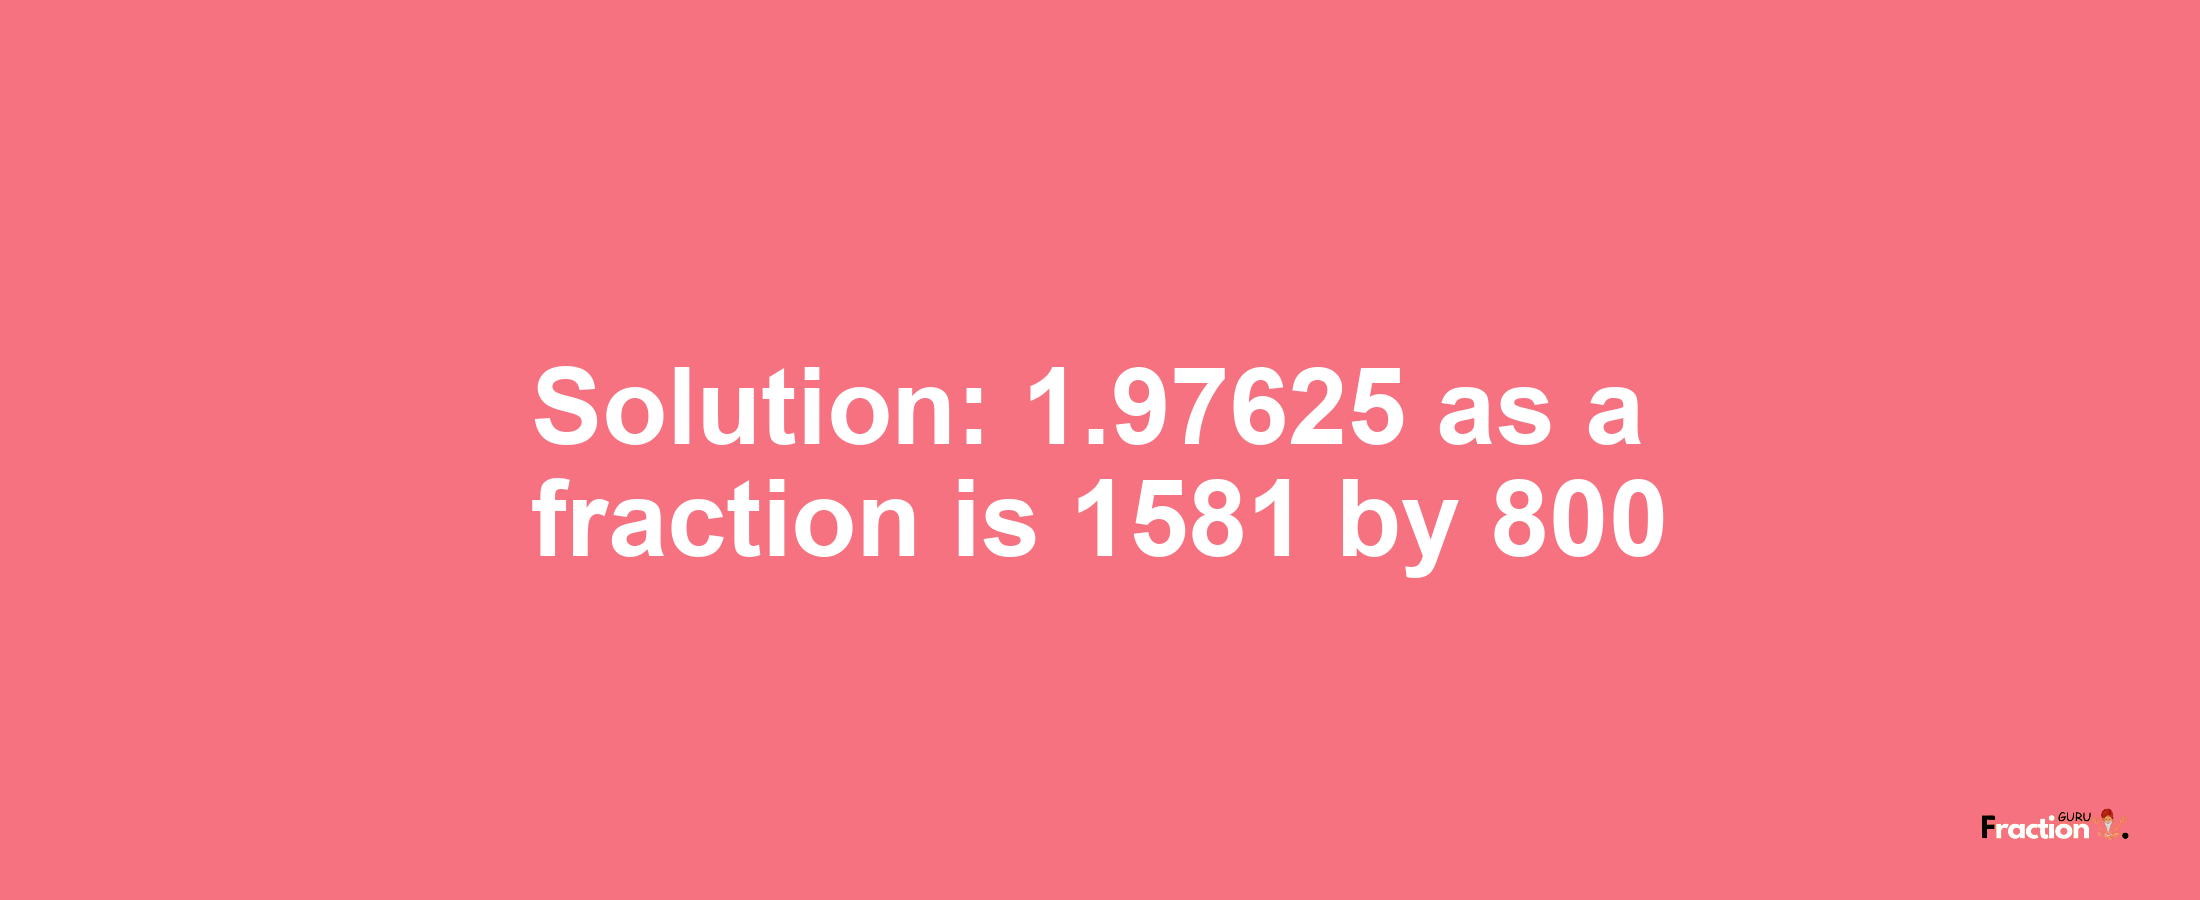 Solution:1.97625 as a fraction is 1581/800